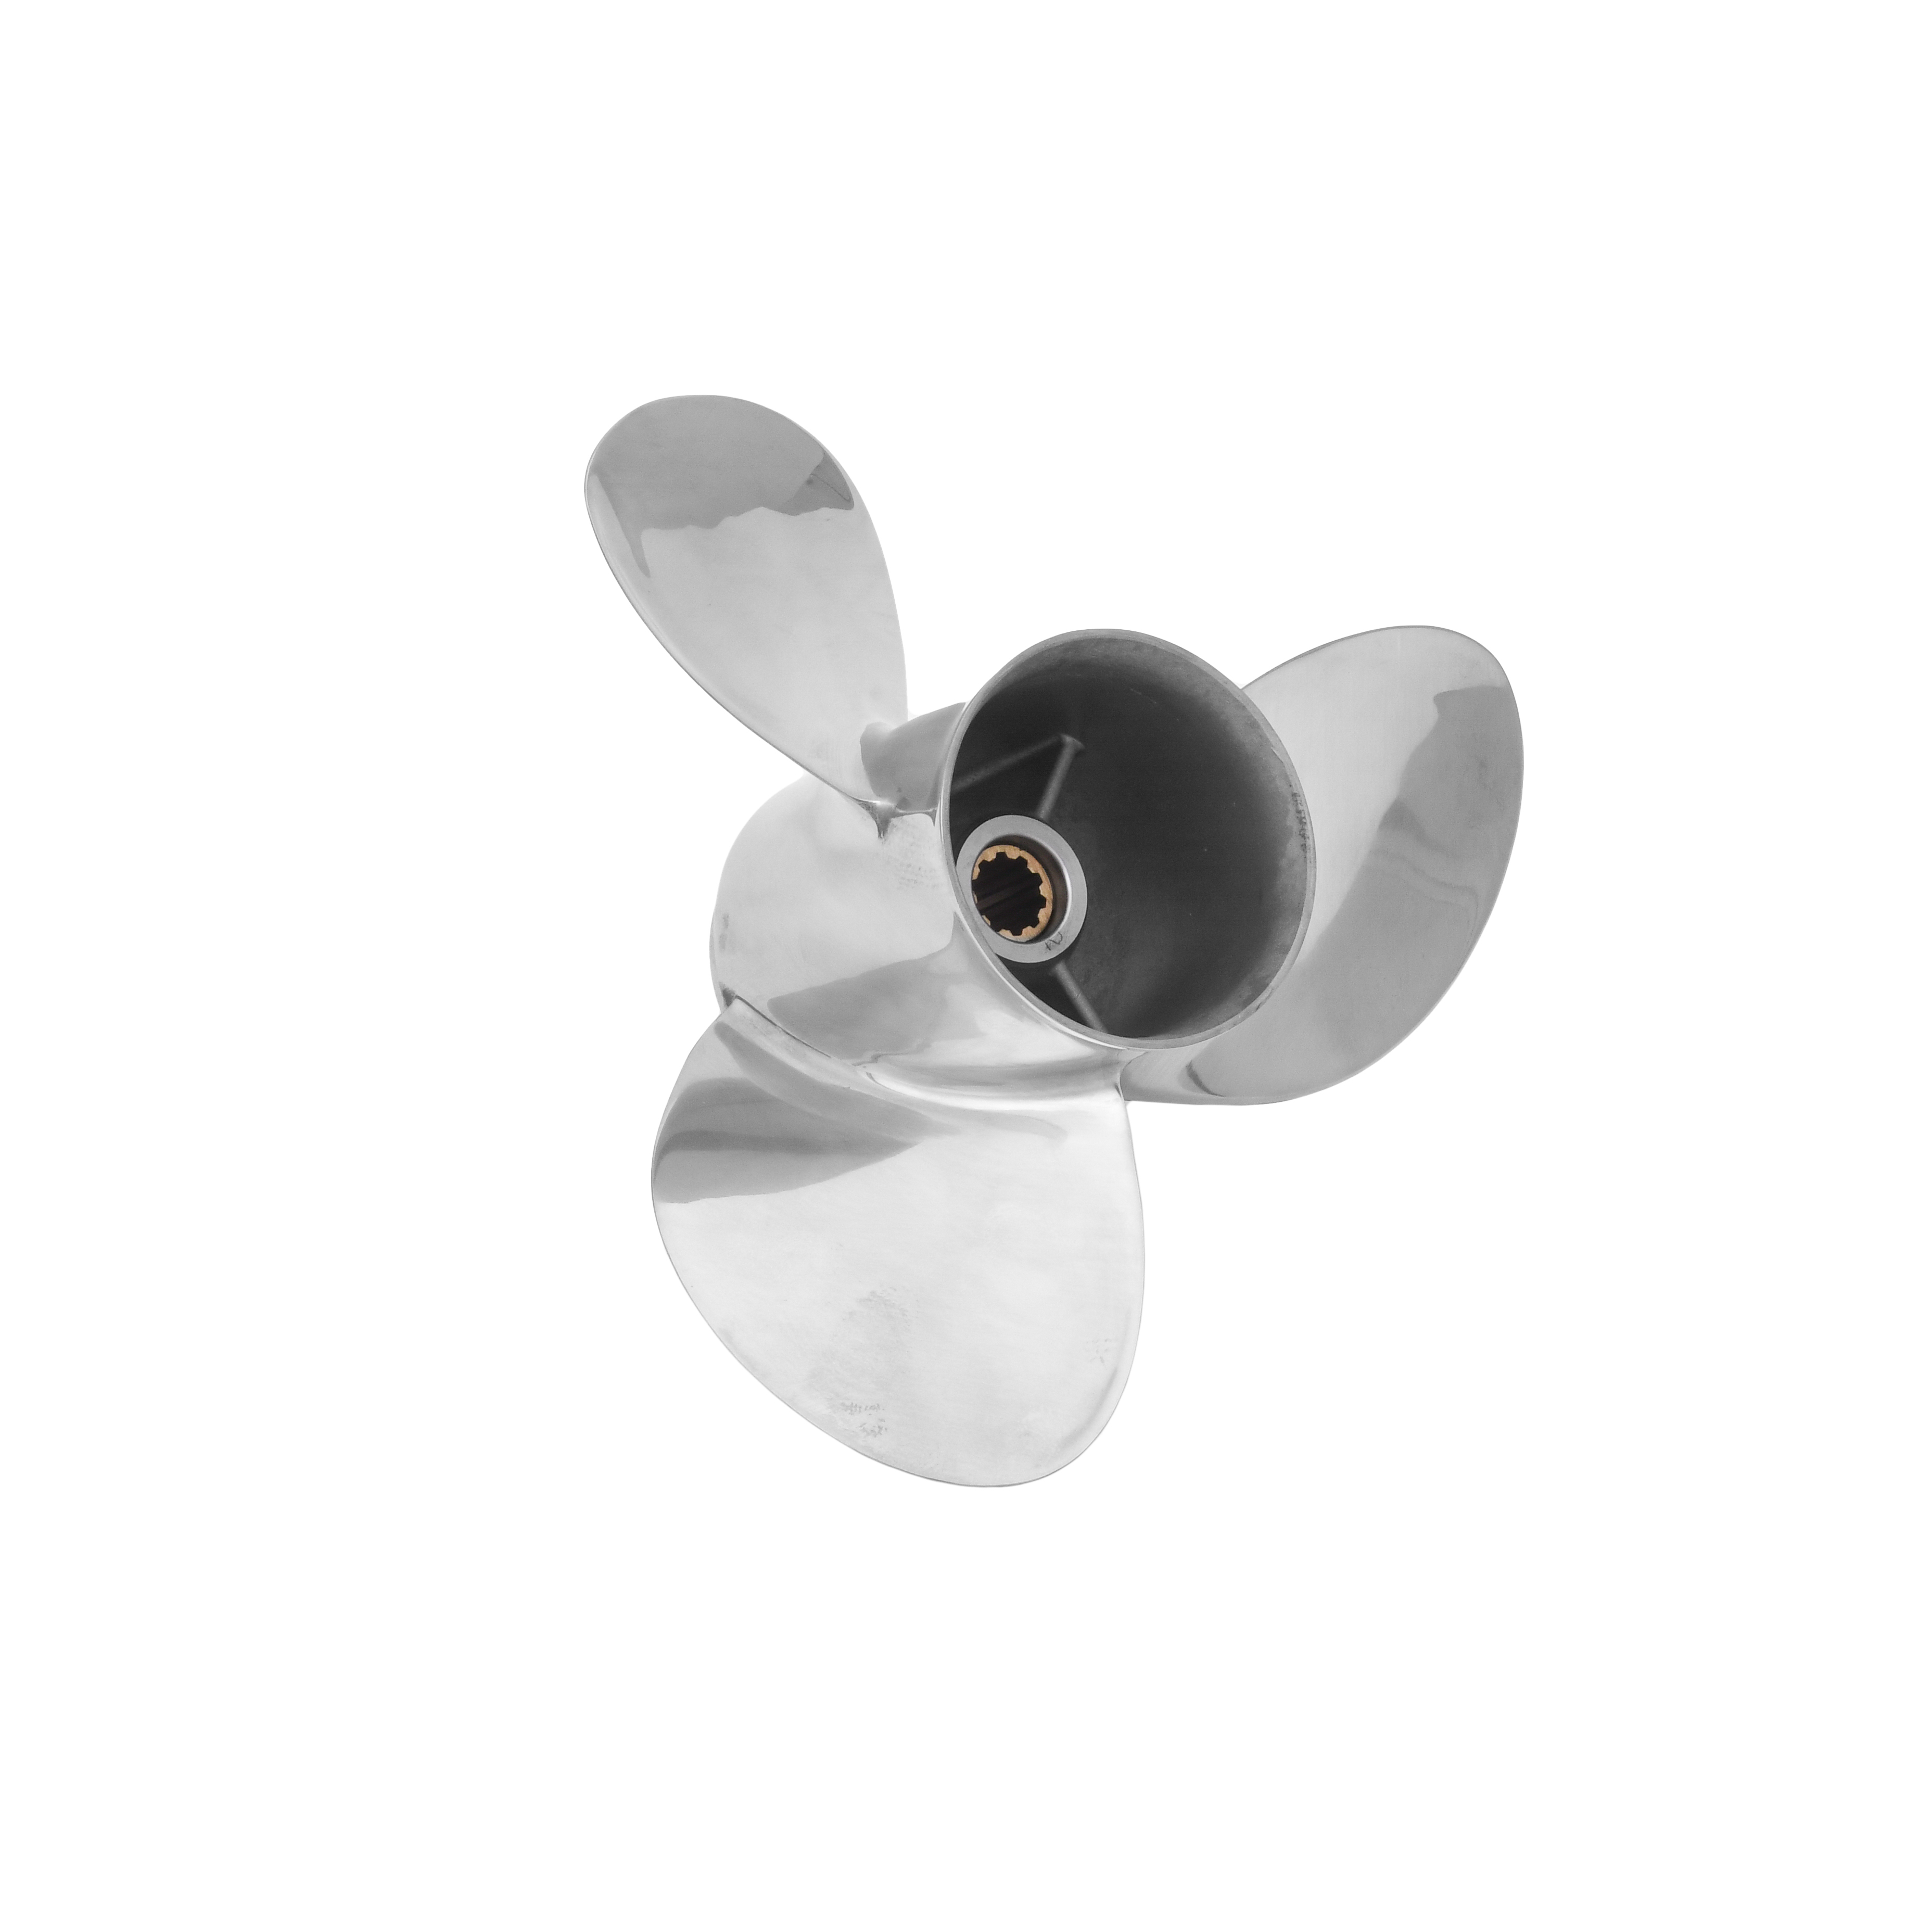 20-30HP Stainless Steel 10 1/4 x 12 Outboard Propeller for Yamaha